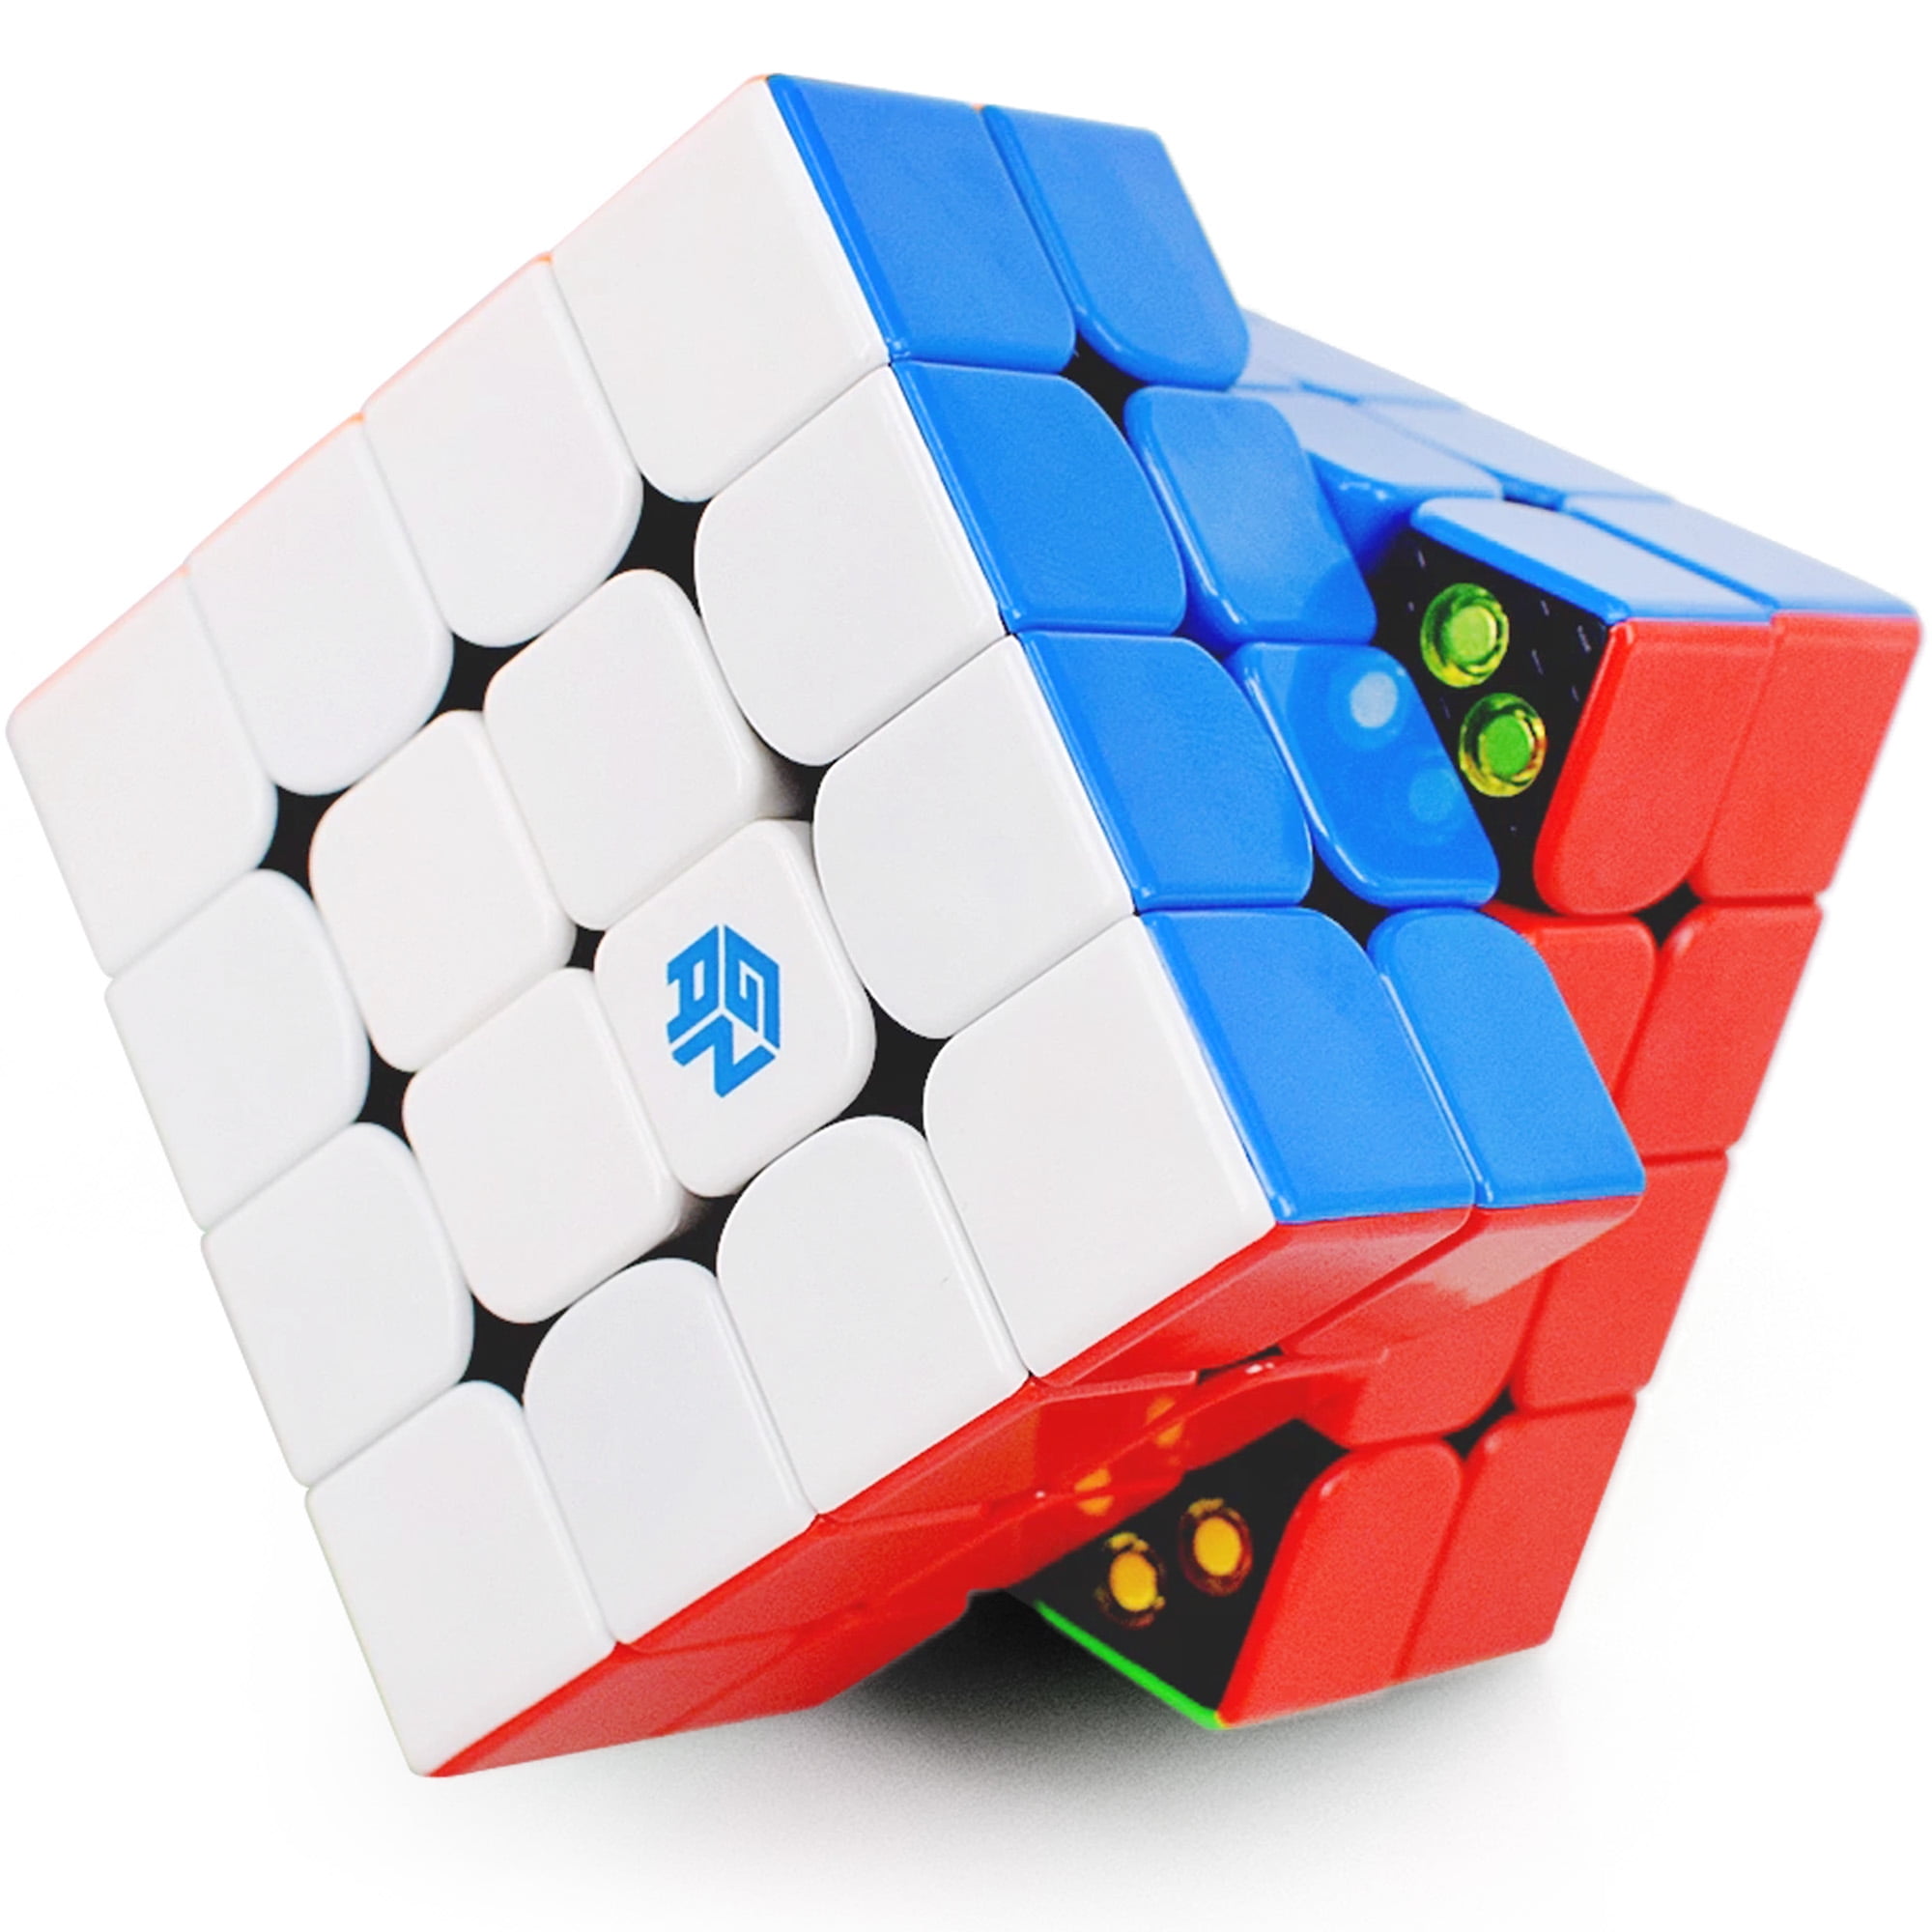 Gan 460 m, 4x4 Magnetic Speed Cube, 4 by 4 Stickerless Puzzle Toy 